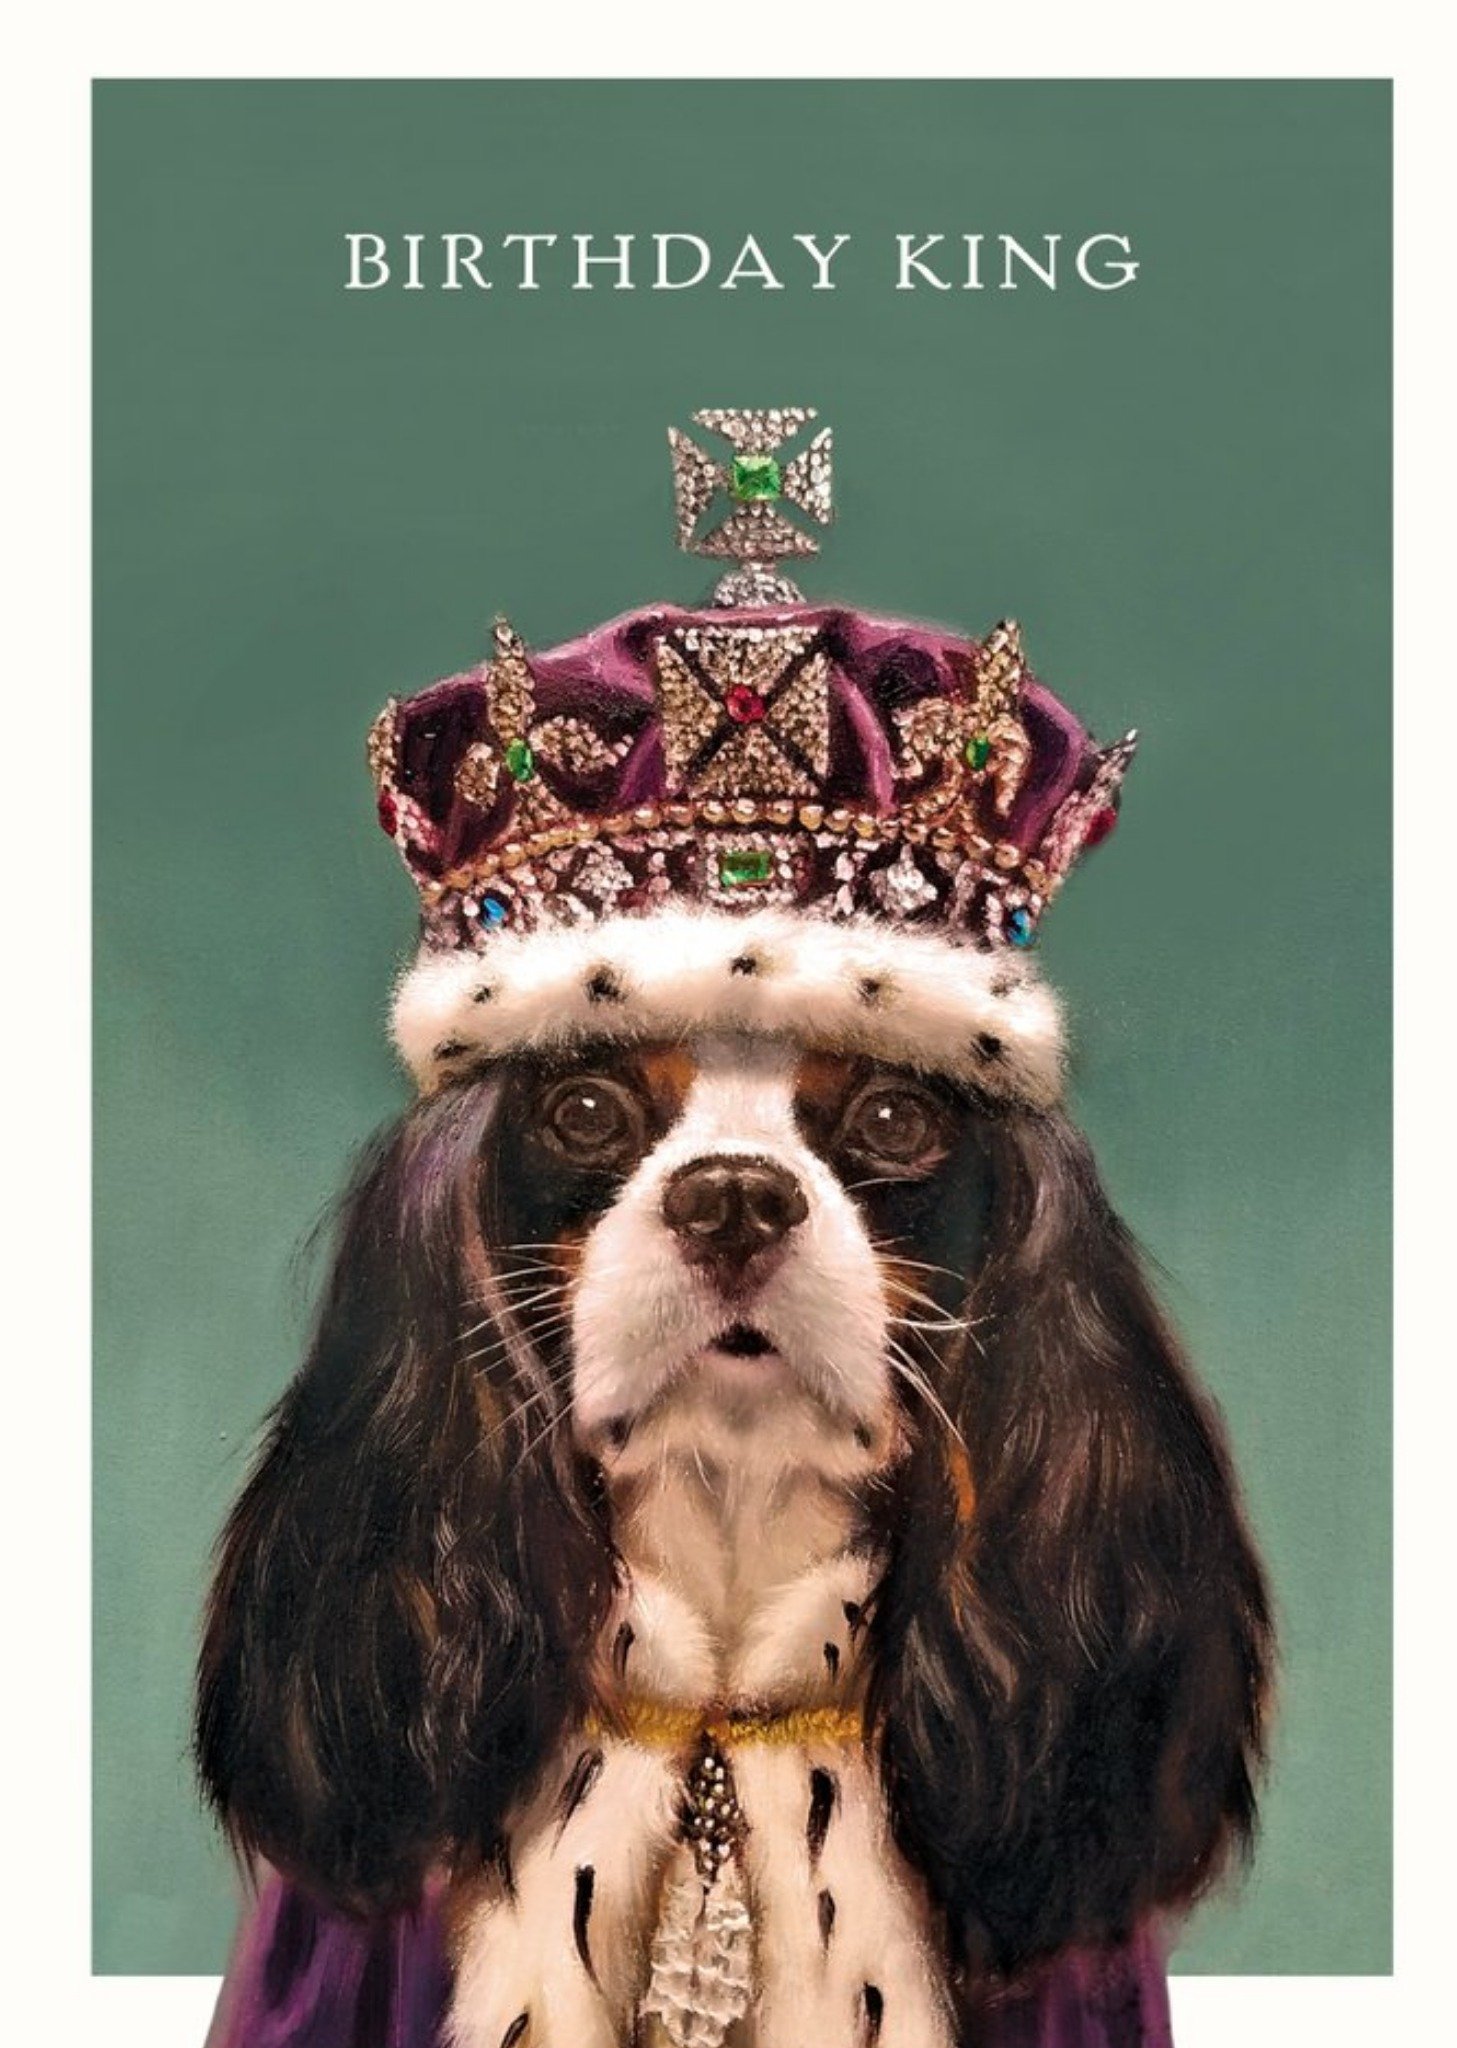 Moonpig Painting Of A Cavalier King Charles Spaniel Birthday King Card, Large